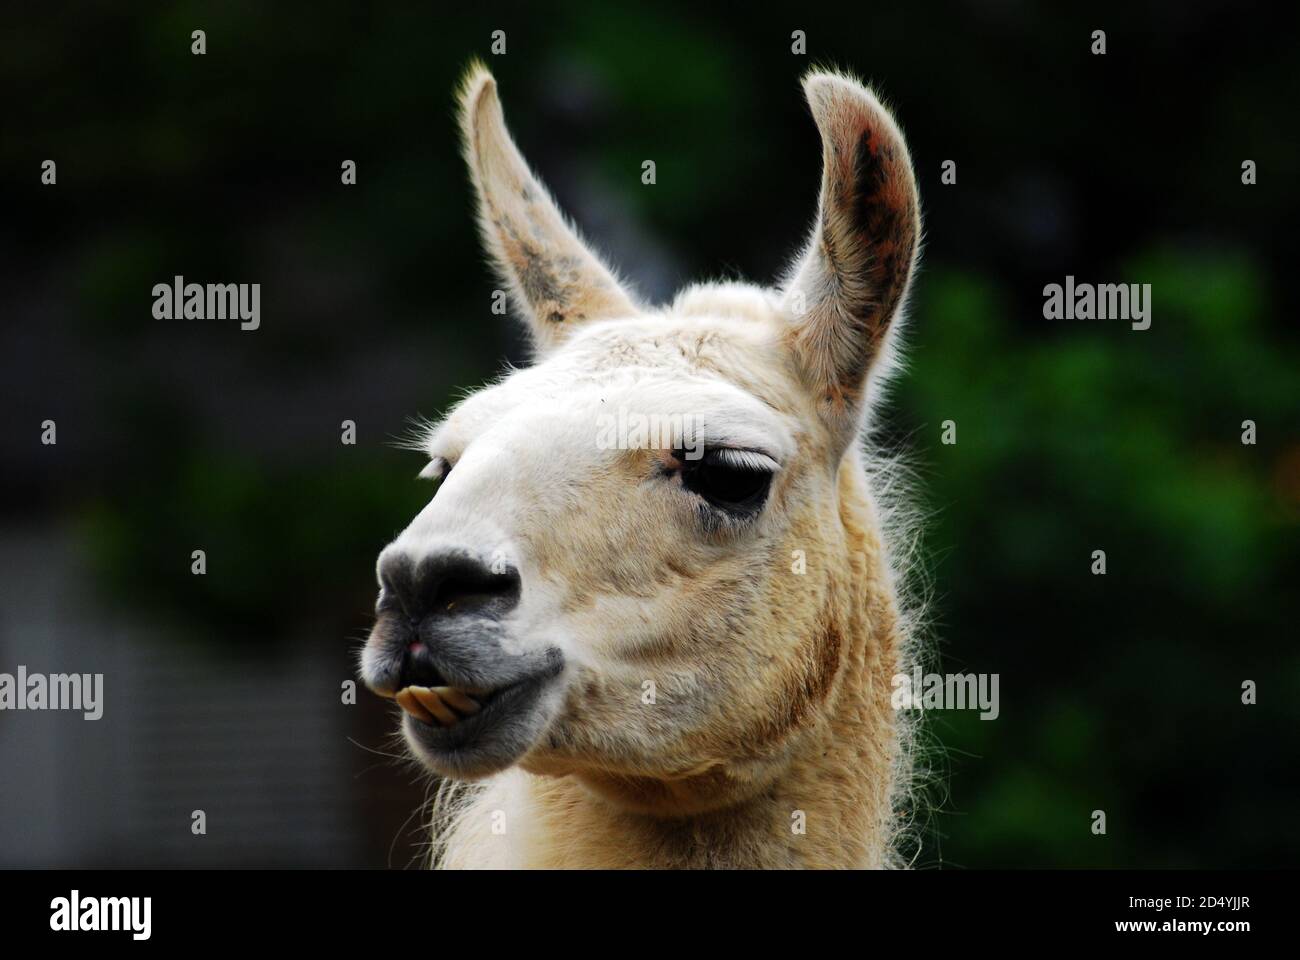 White Llama (lama glama), close-up head, ears, snout and eyes Domesticated South American camelid widely used as a pack animal & for its wool and meat Stock Photo